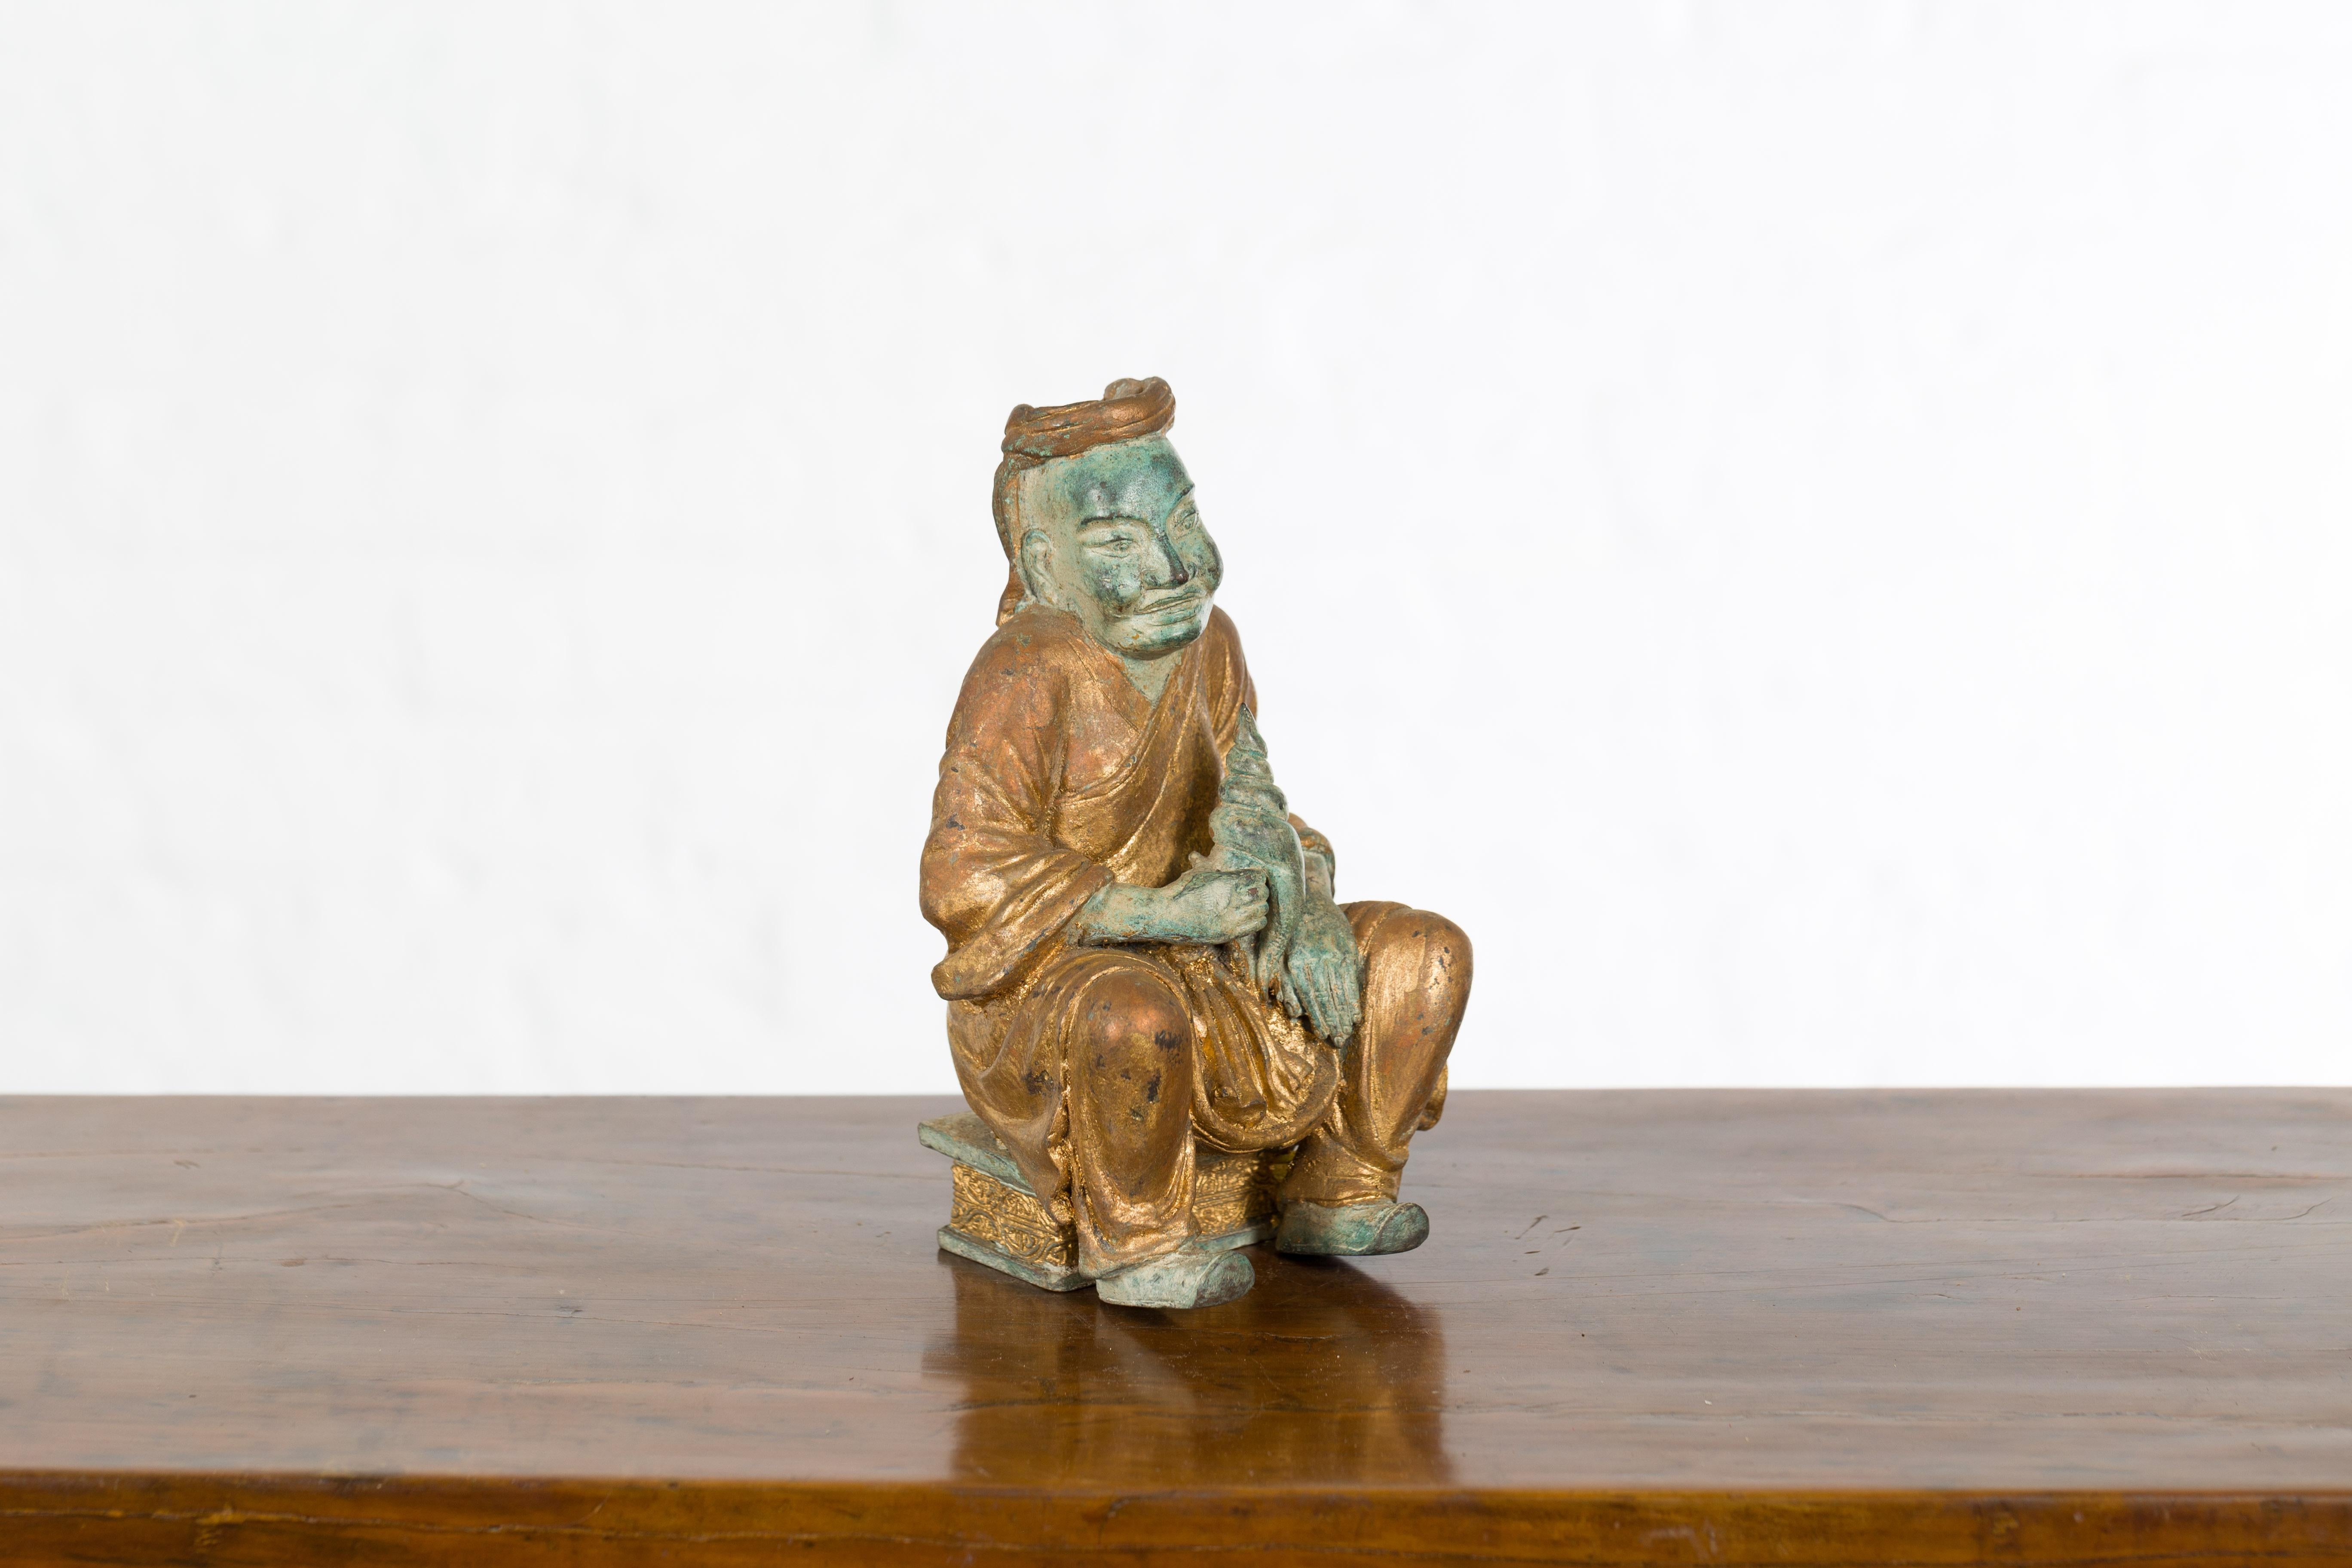 Petite Thai Verde and Gilded Statuette of a Seated Monk Holding a Conch Shell 1